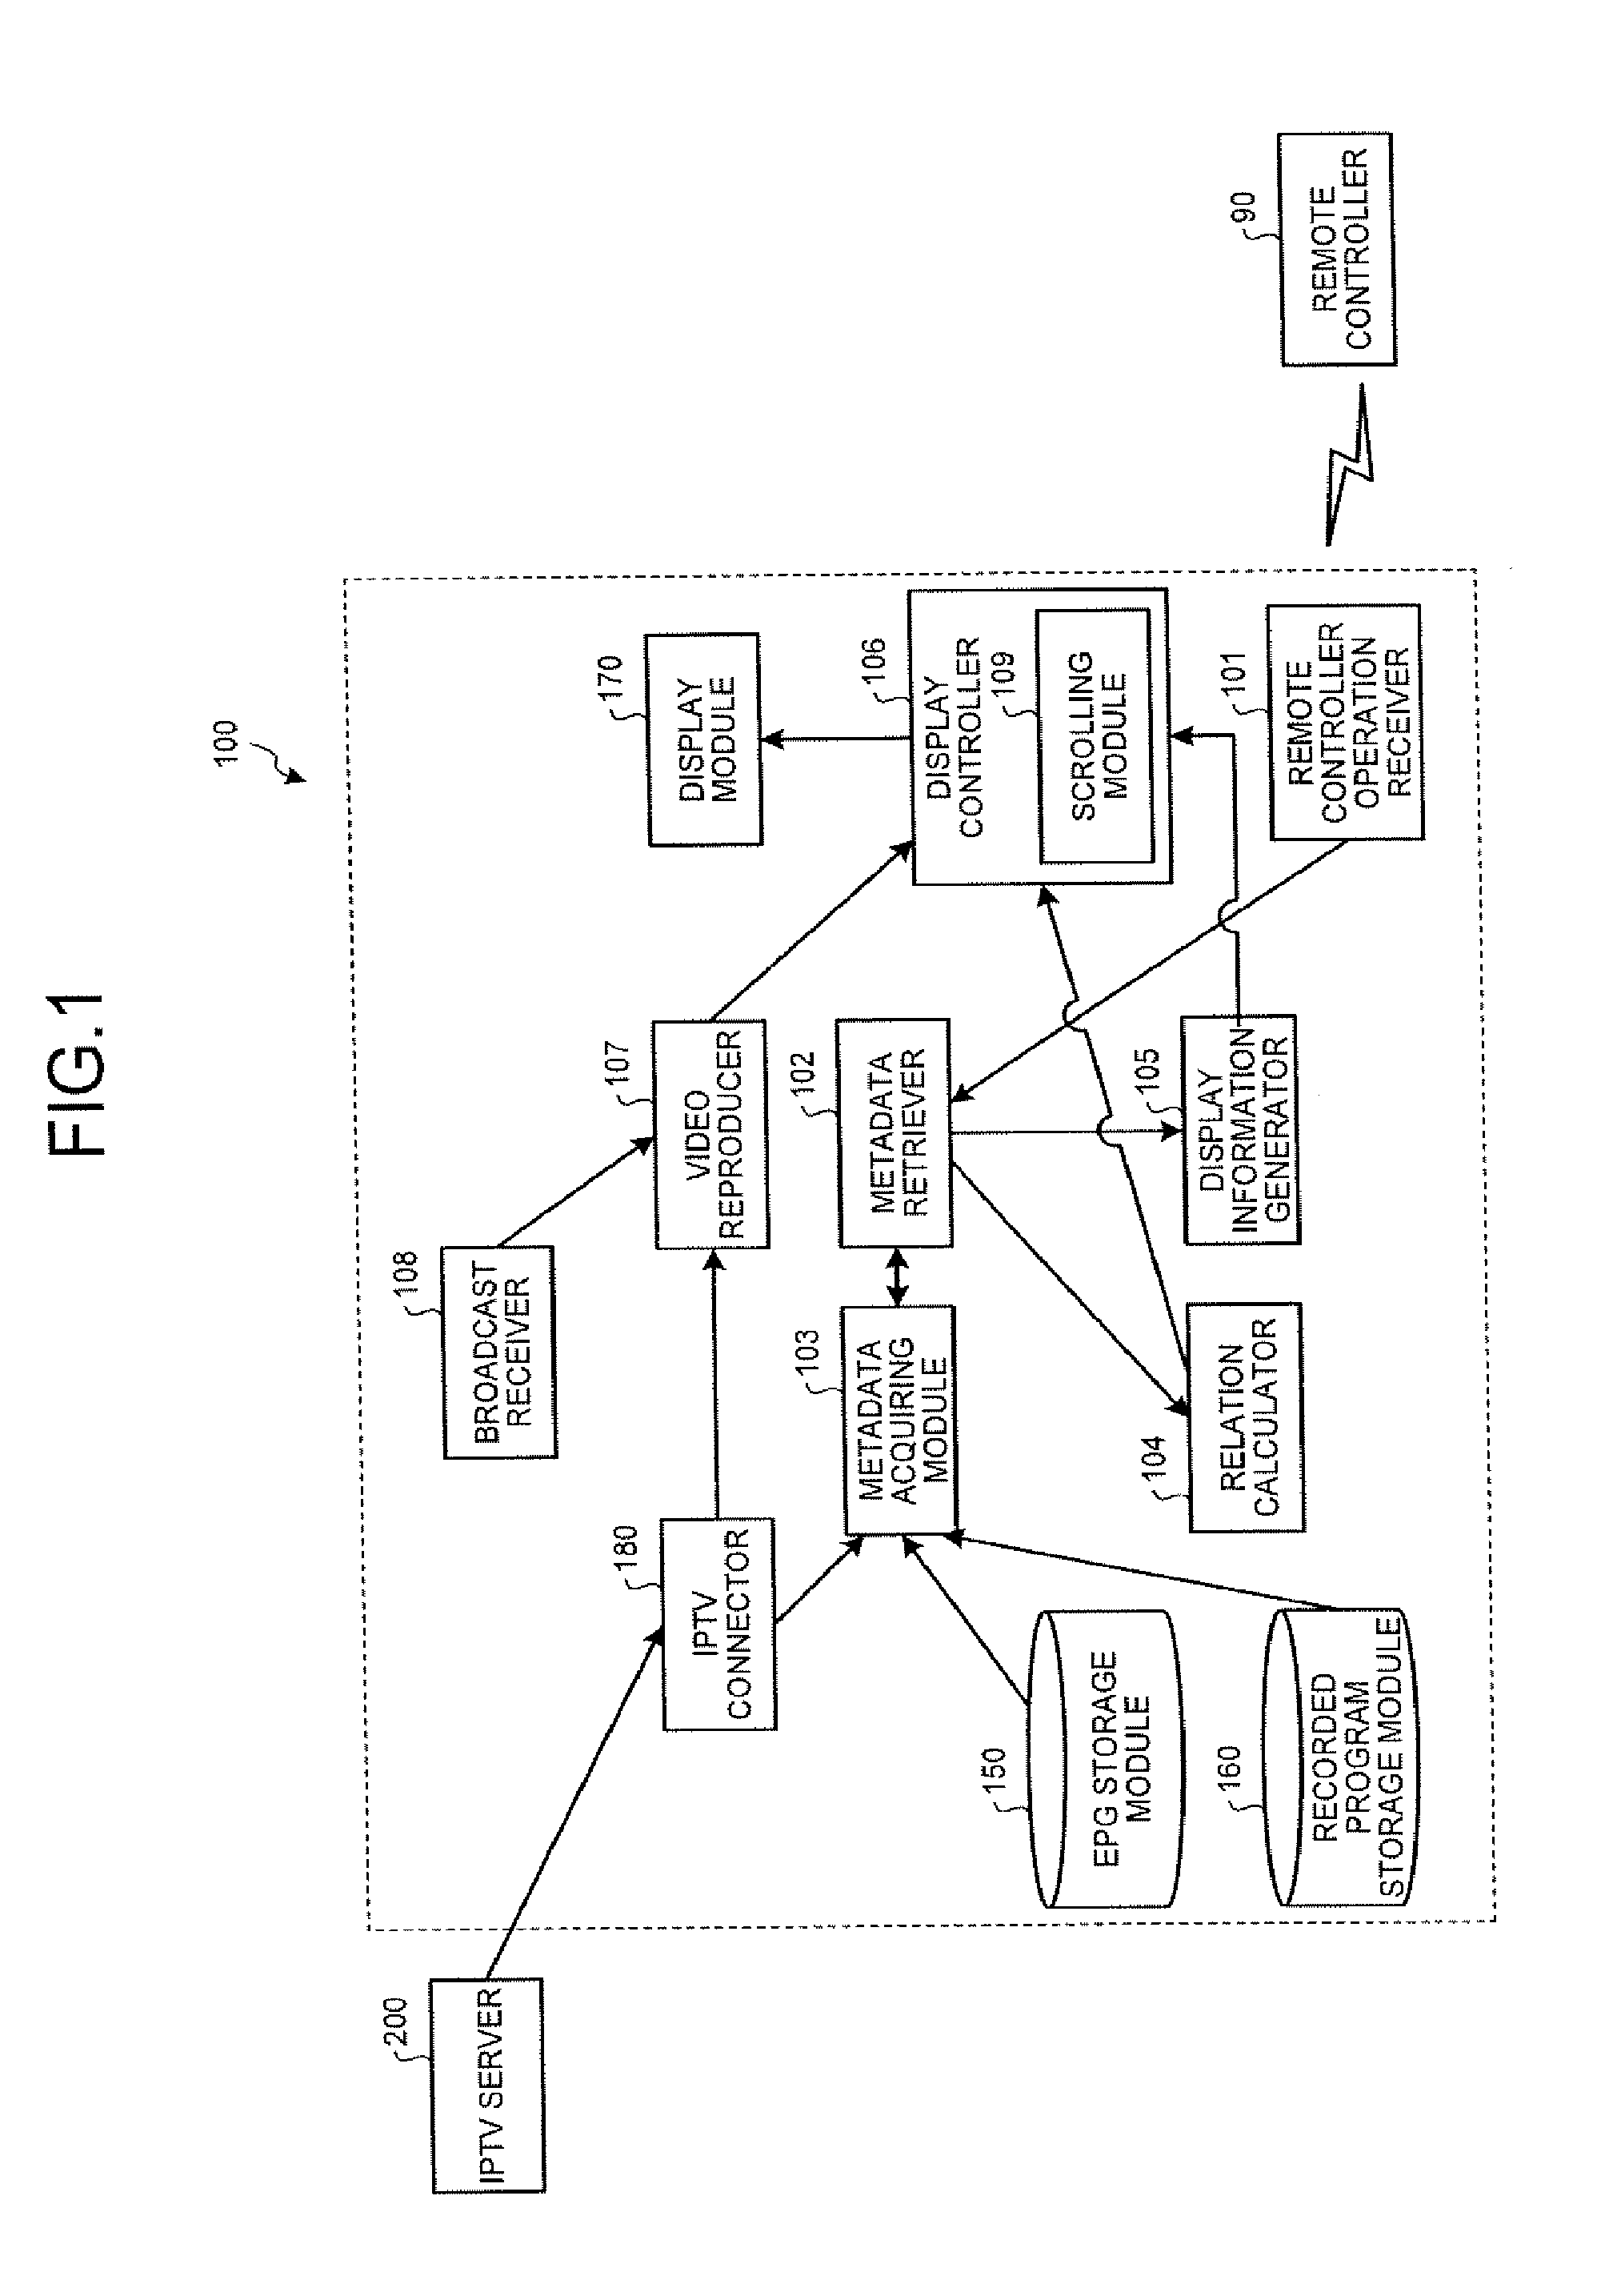 Display processing apparatus, display processing method, and computer program product